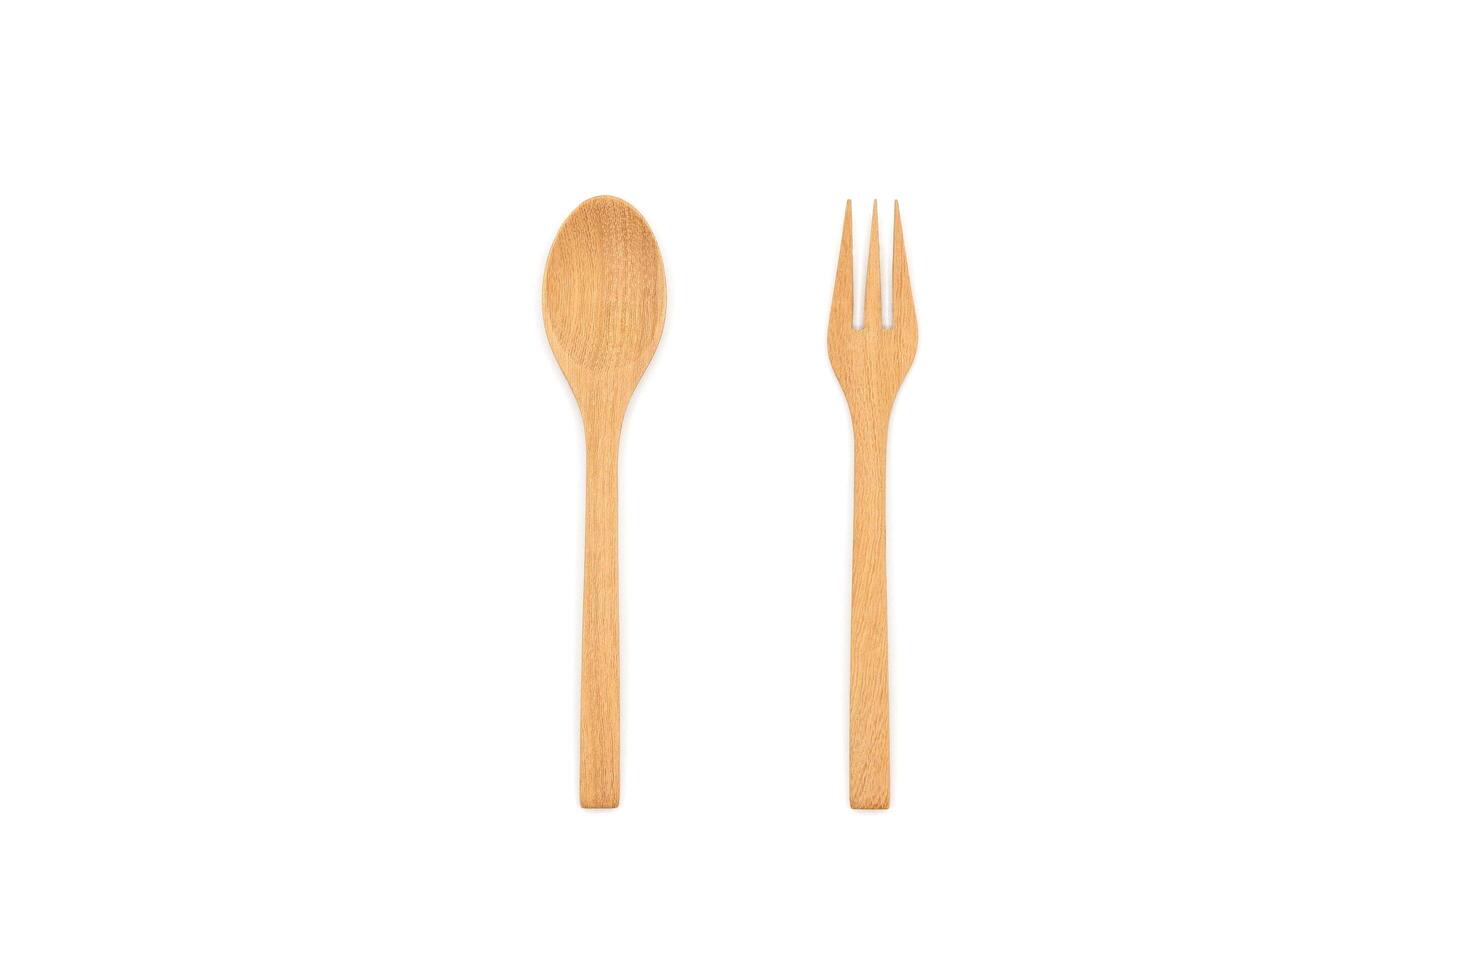 Wooden spoon and fork, isolated on white background. Top view image. photo